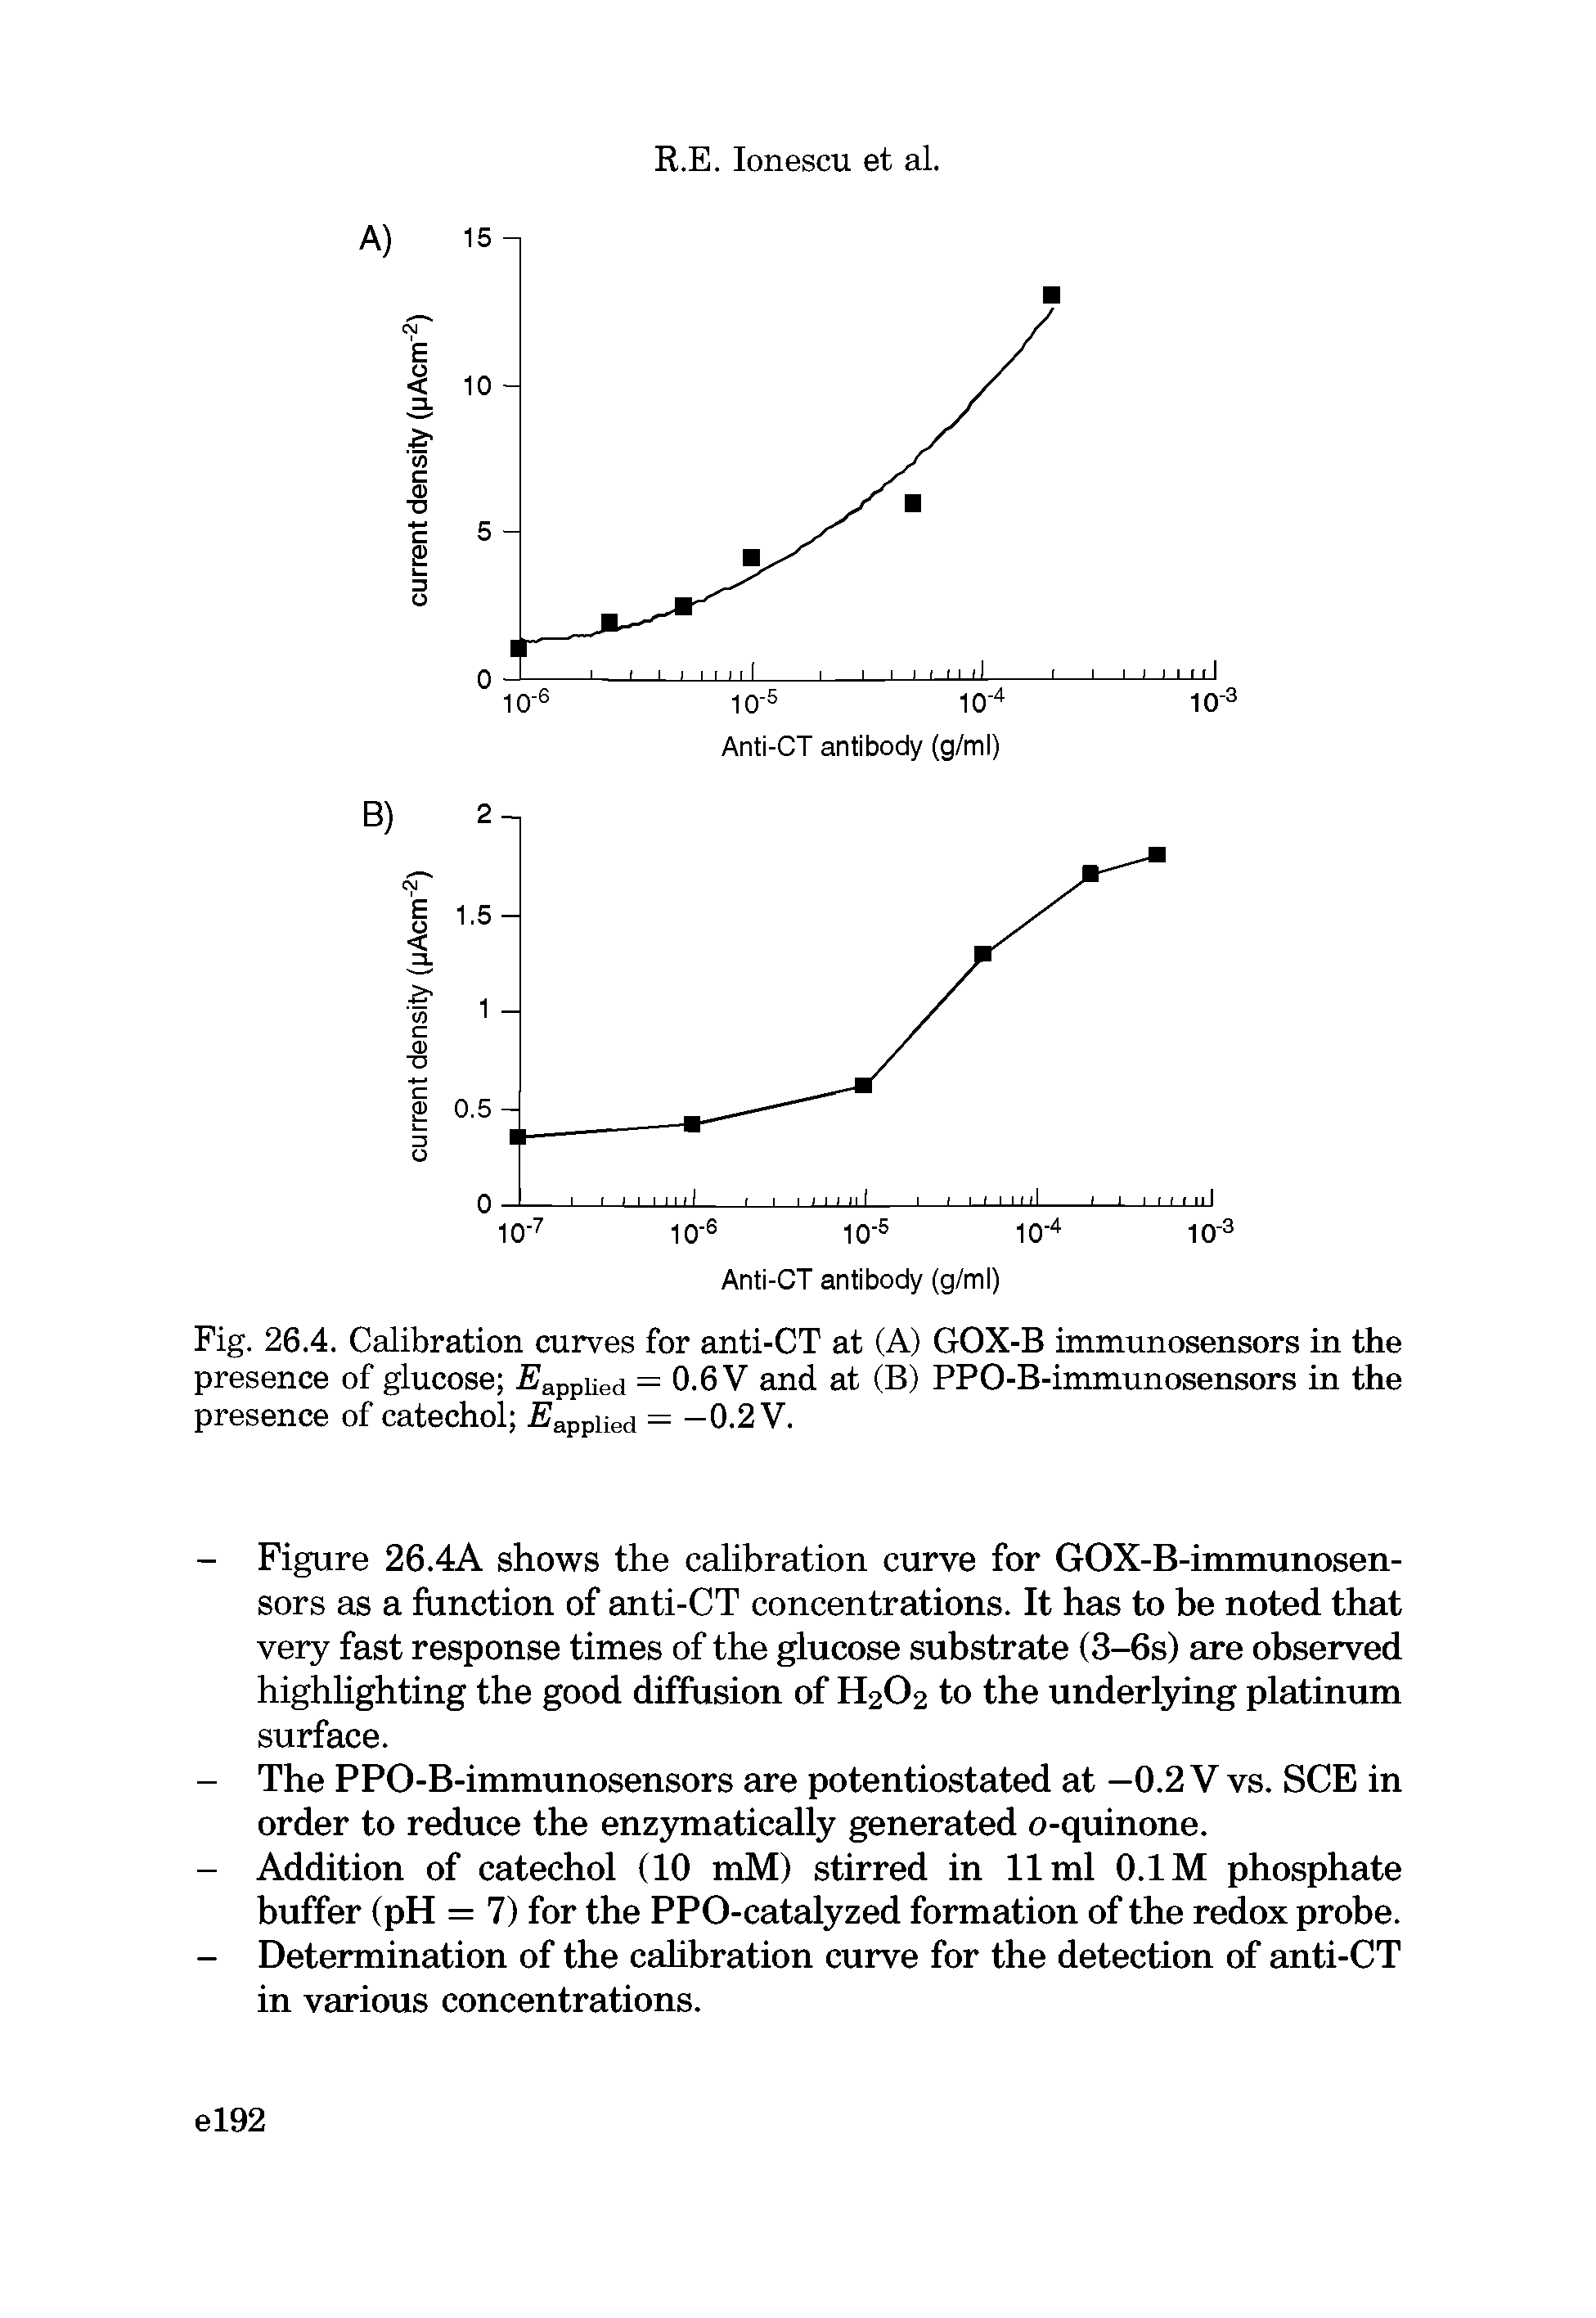 Fig. 26.4. Calibration curves for anti-CT at (A) GOX-B immunosensors in the presence of glucose Fappiied = 0.6 V and at (B) PPO-B-immunosensors in the presence of catechol Fappiied = -0.2 V.